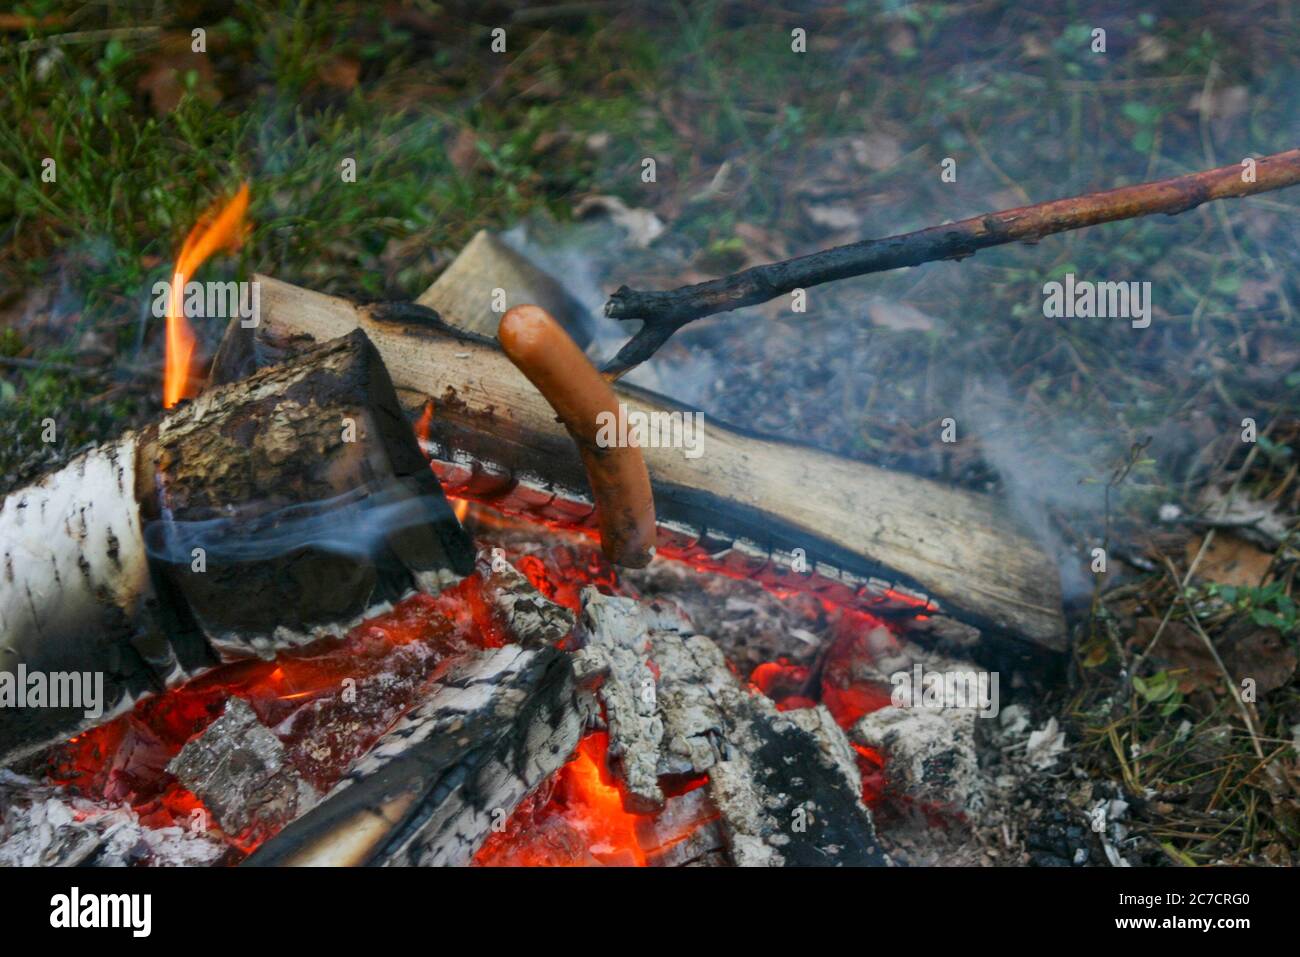 GRILLING outdoor over open fire Stock Photo